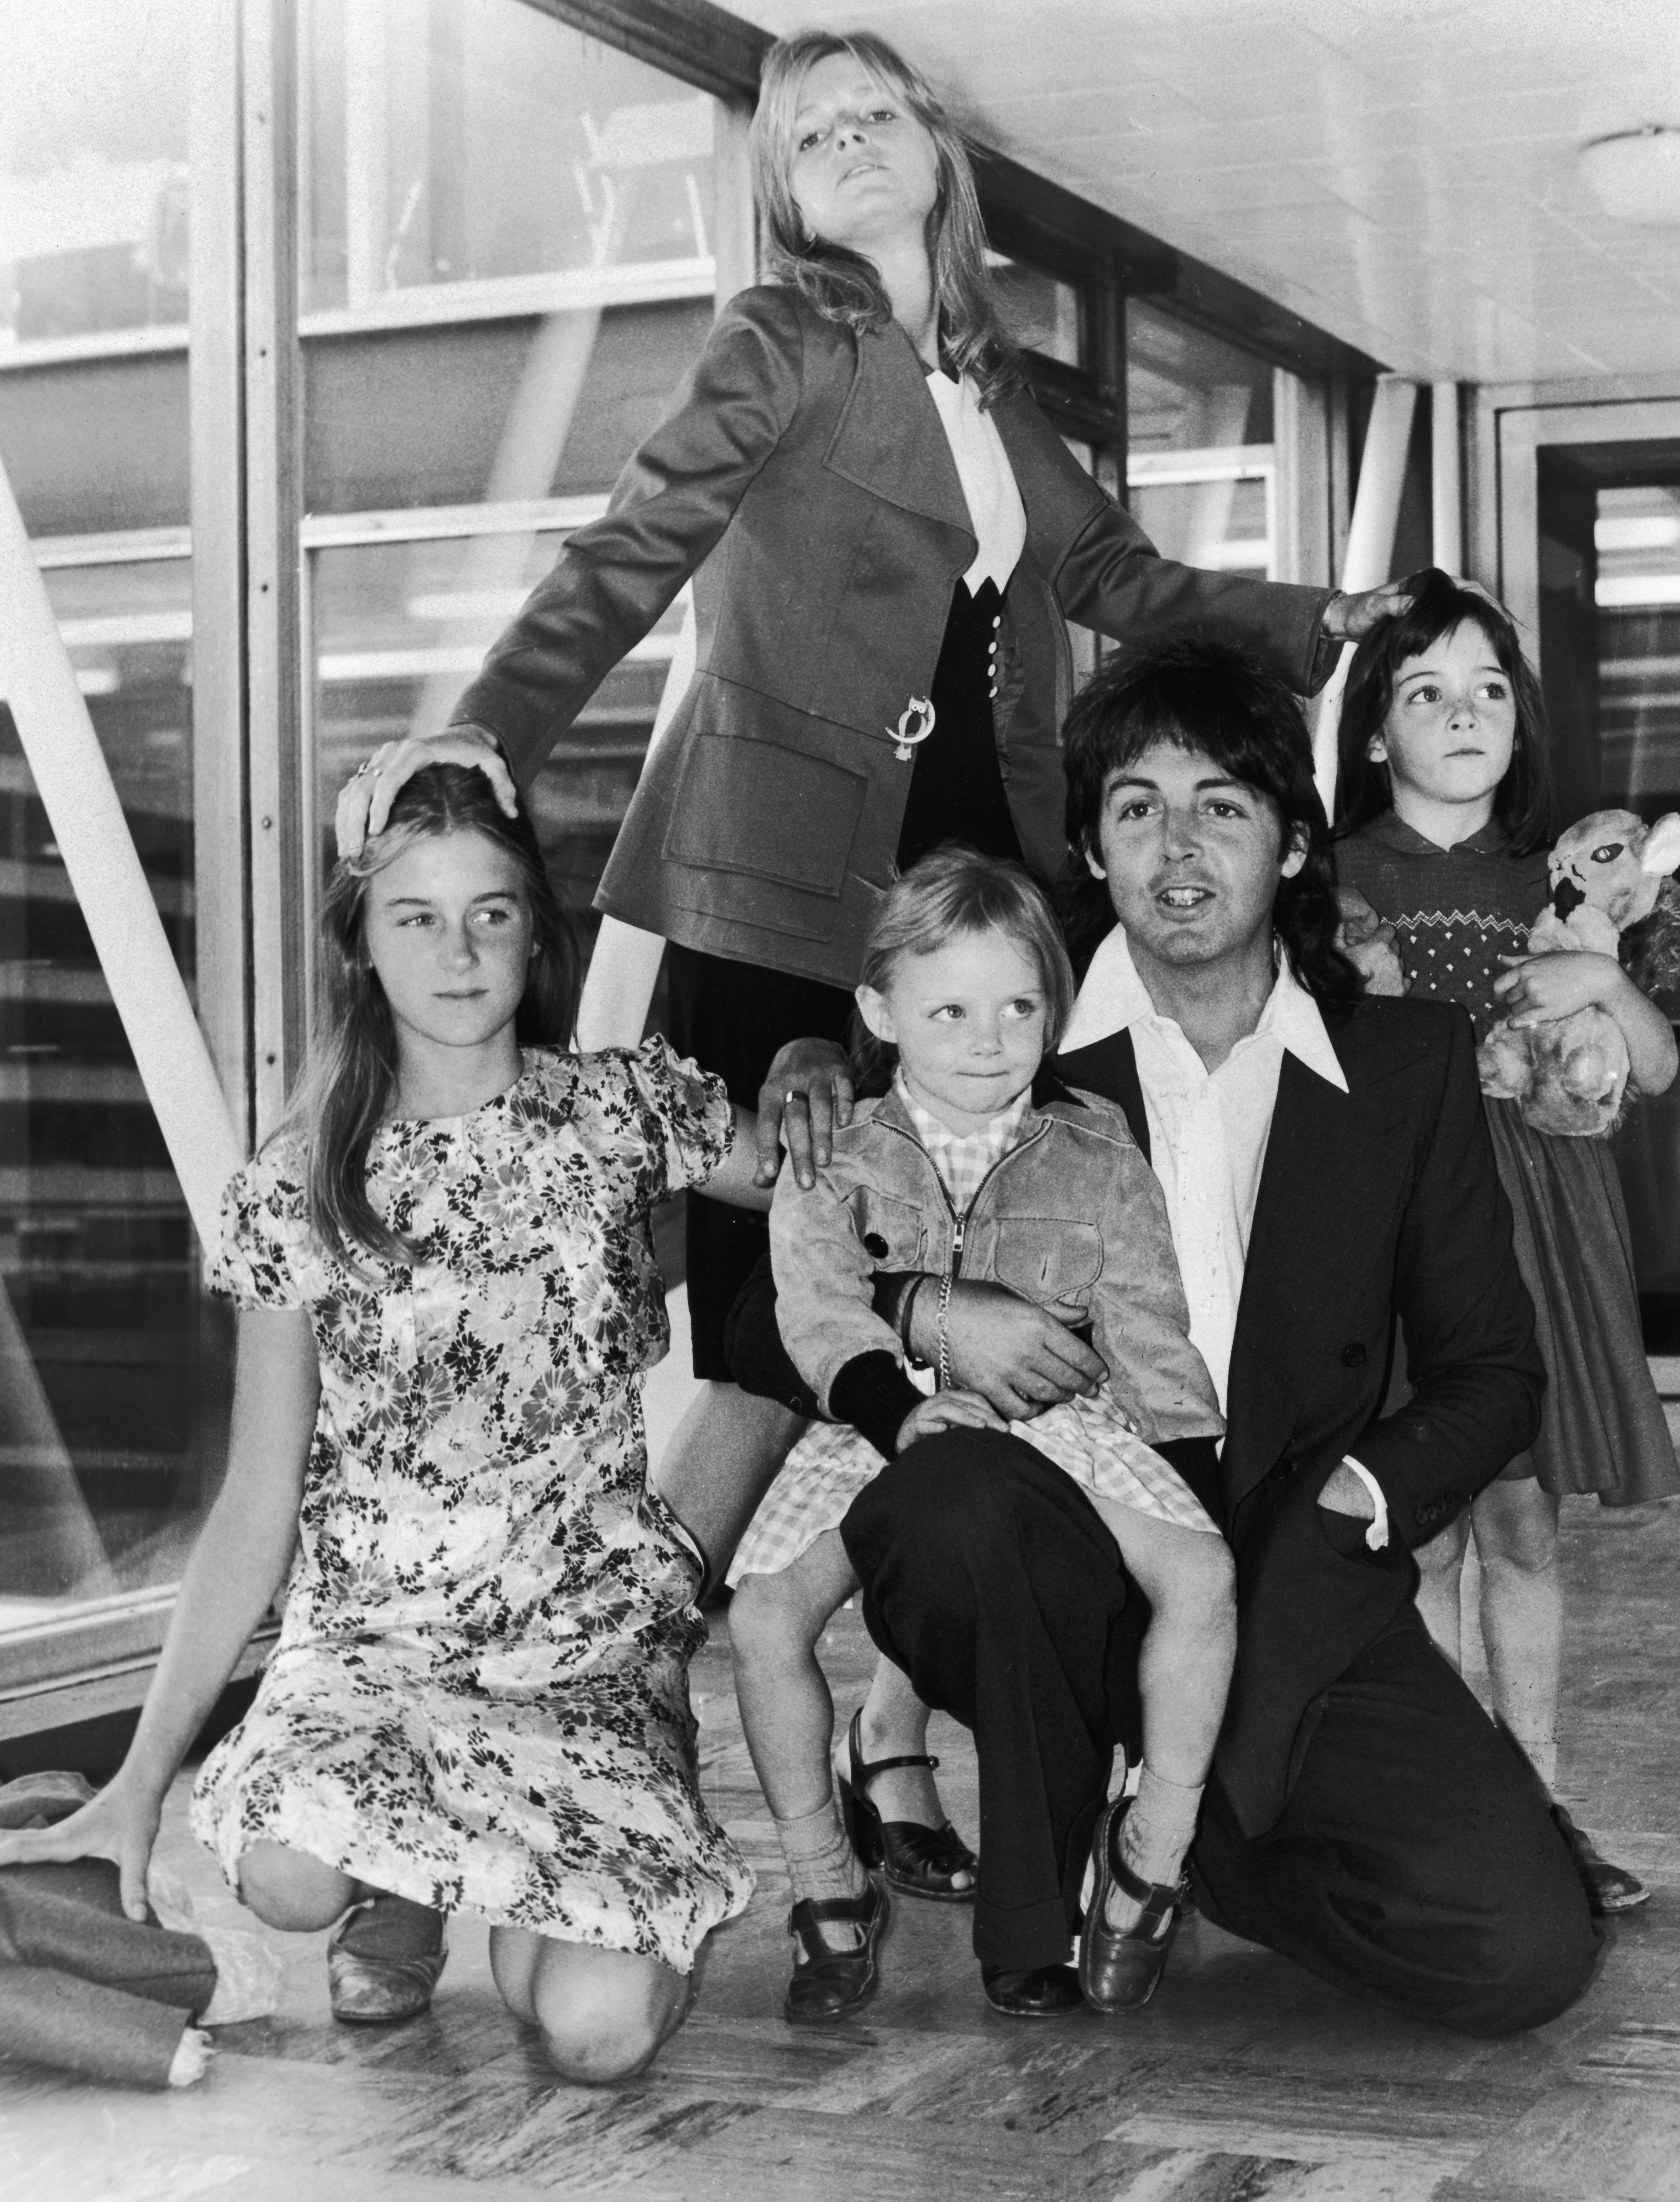 Paul McCartney, Linda McCartney, and their daughters Heather, Stella, and Mary pose at an airport on June 30, 1975. | Source: Getty Images